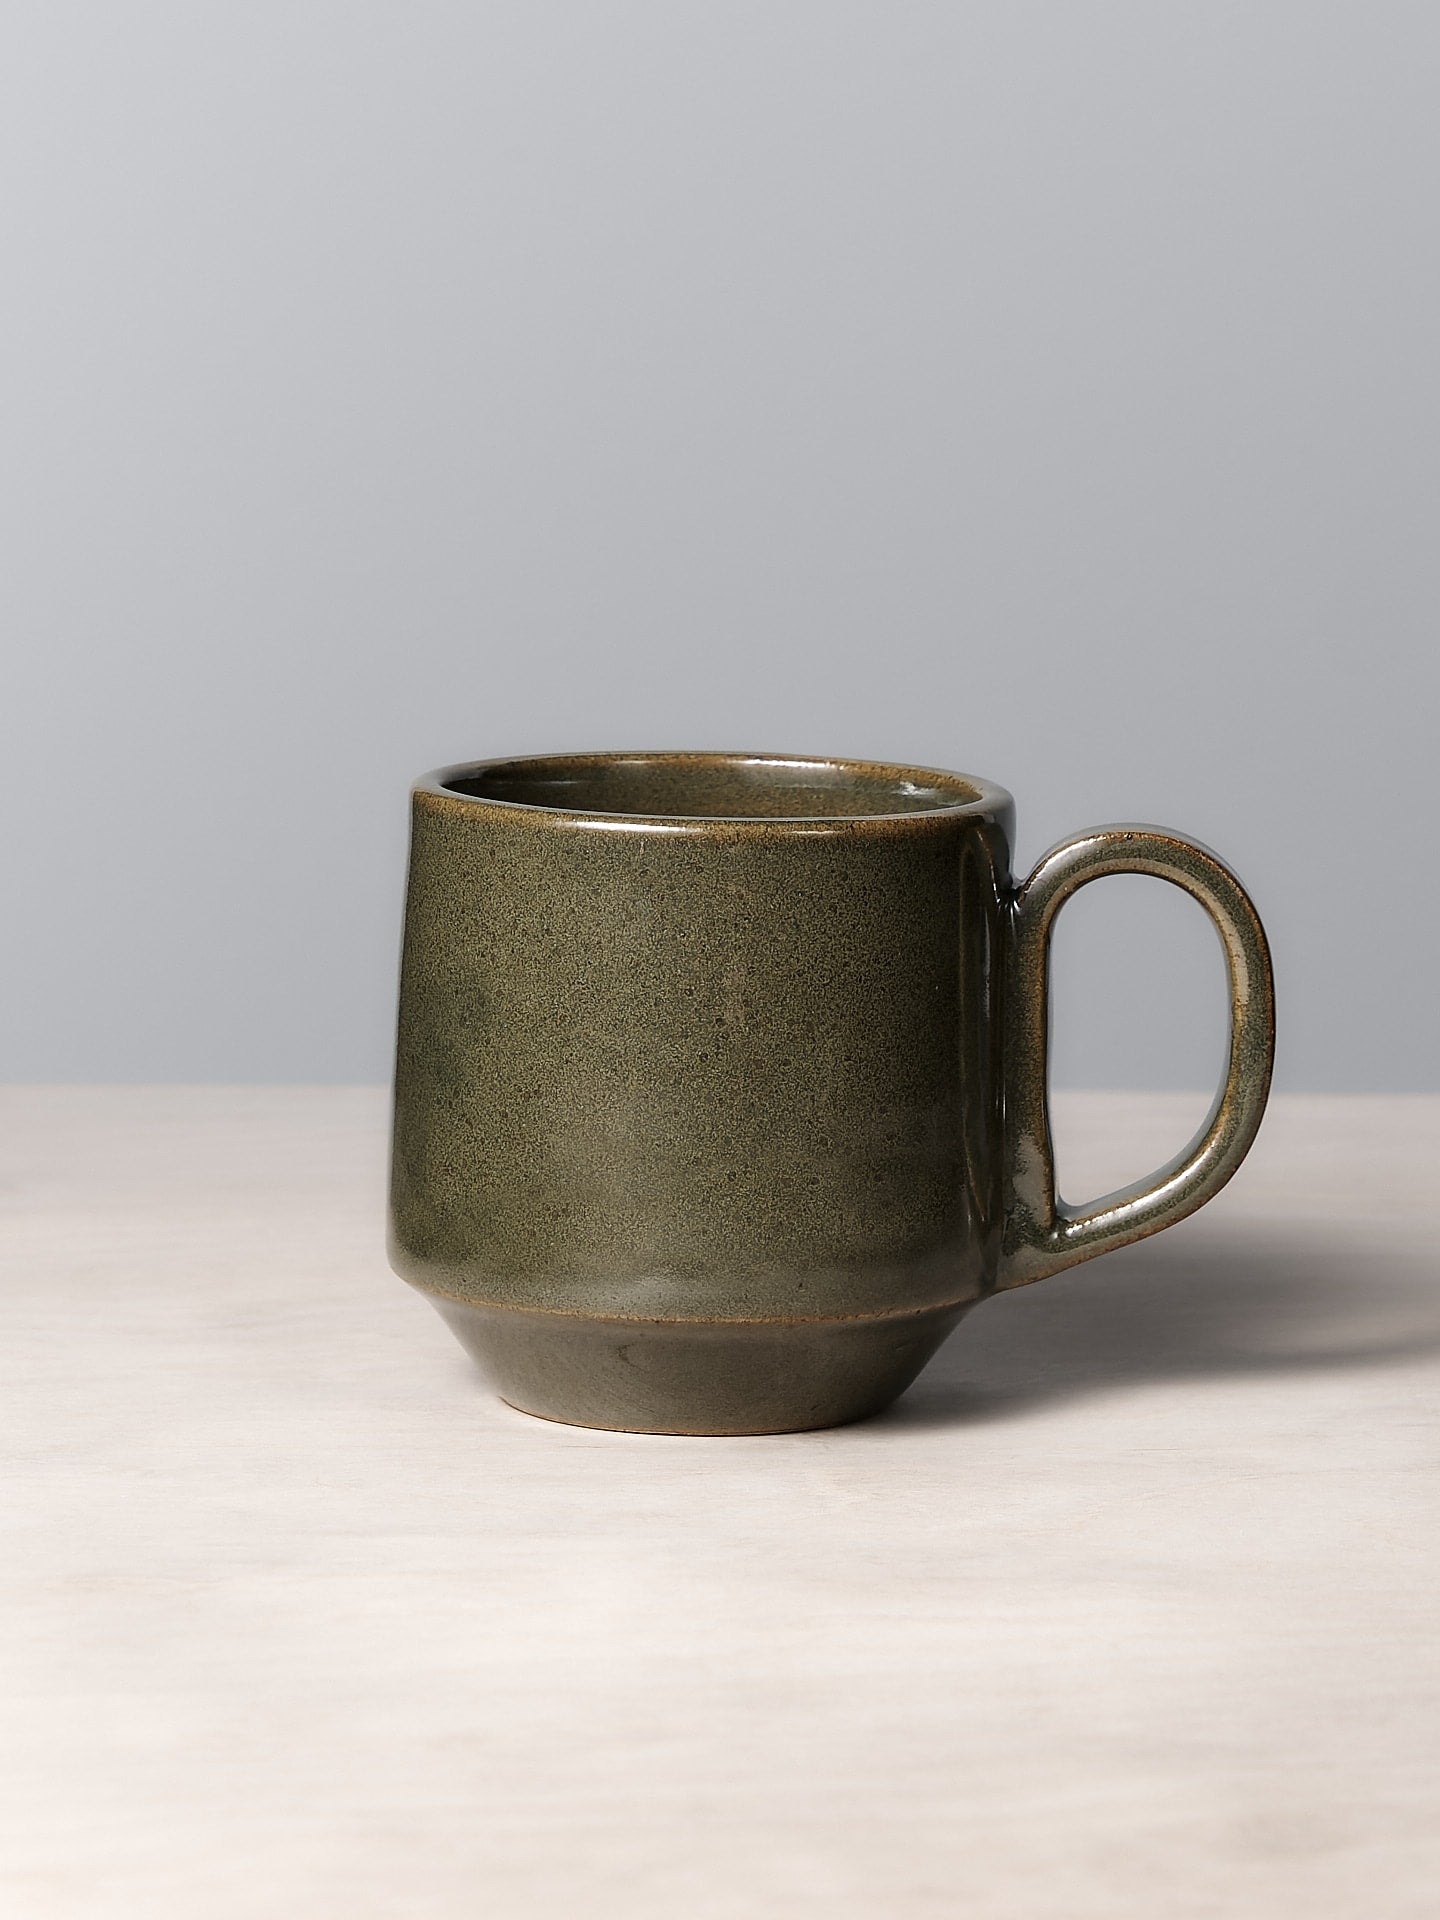 A Large Stacking Mug – Green by Richard Beauchamp sitting on a table.